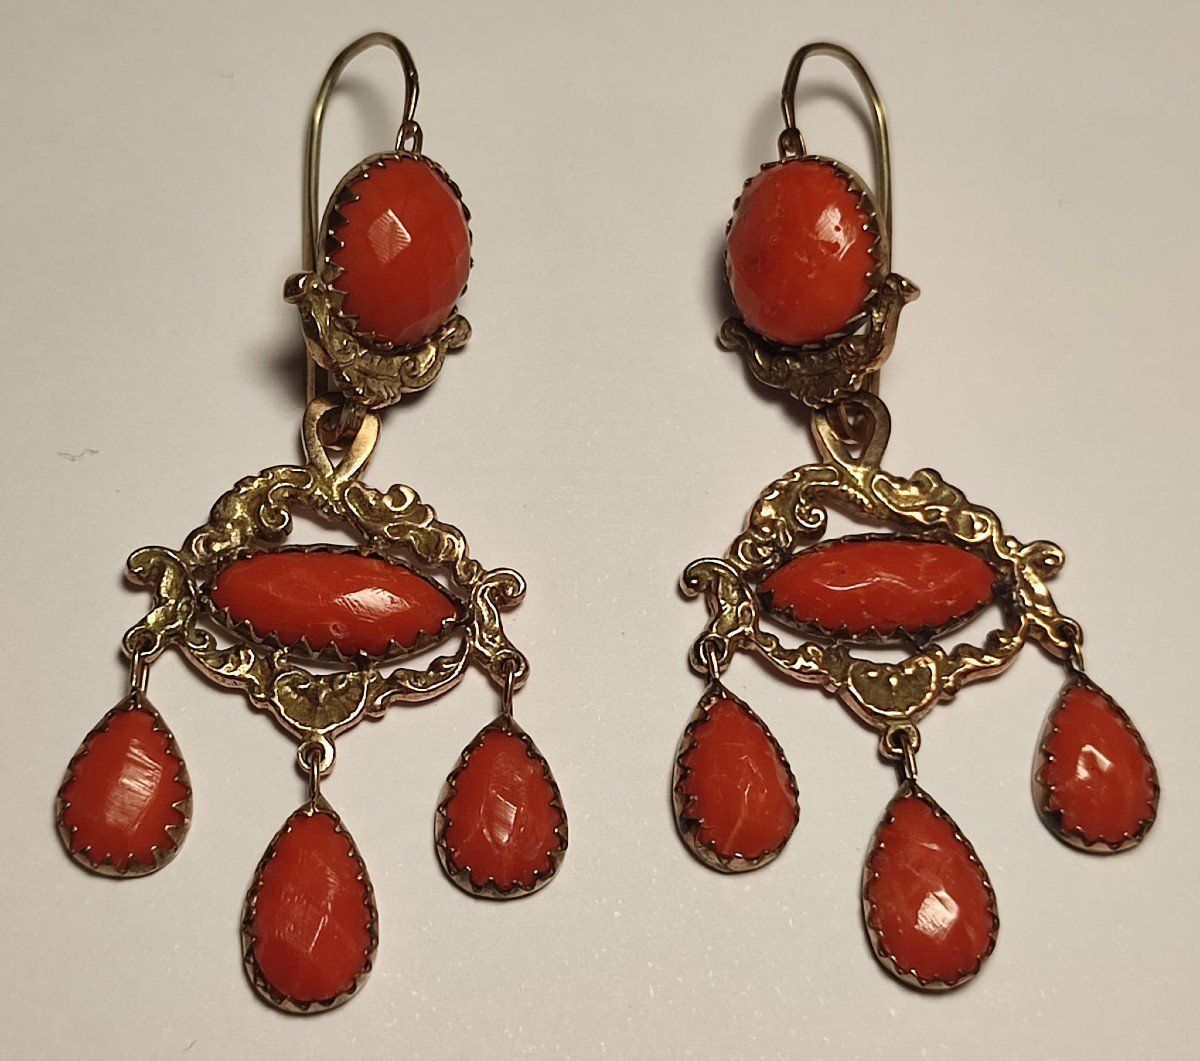 Gold And Faceted Coral Earrings With Teardrop Pendants. Sicily Late 700' Early 800'.